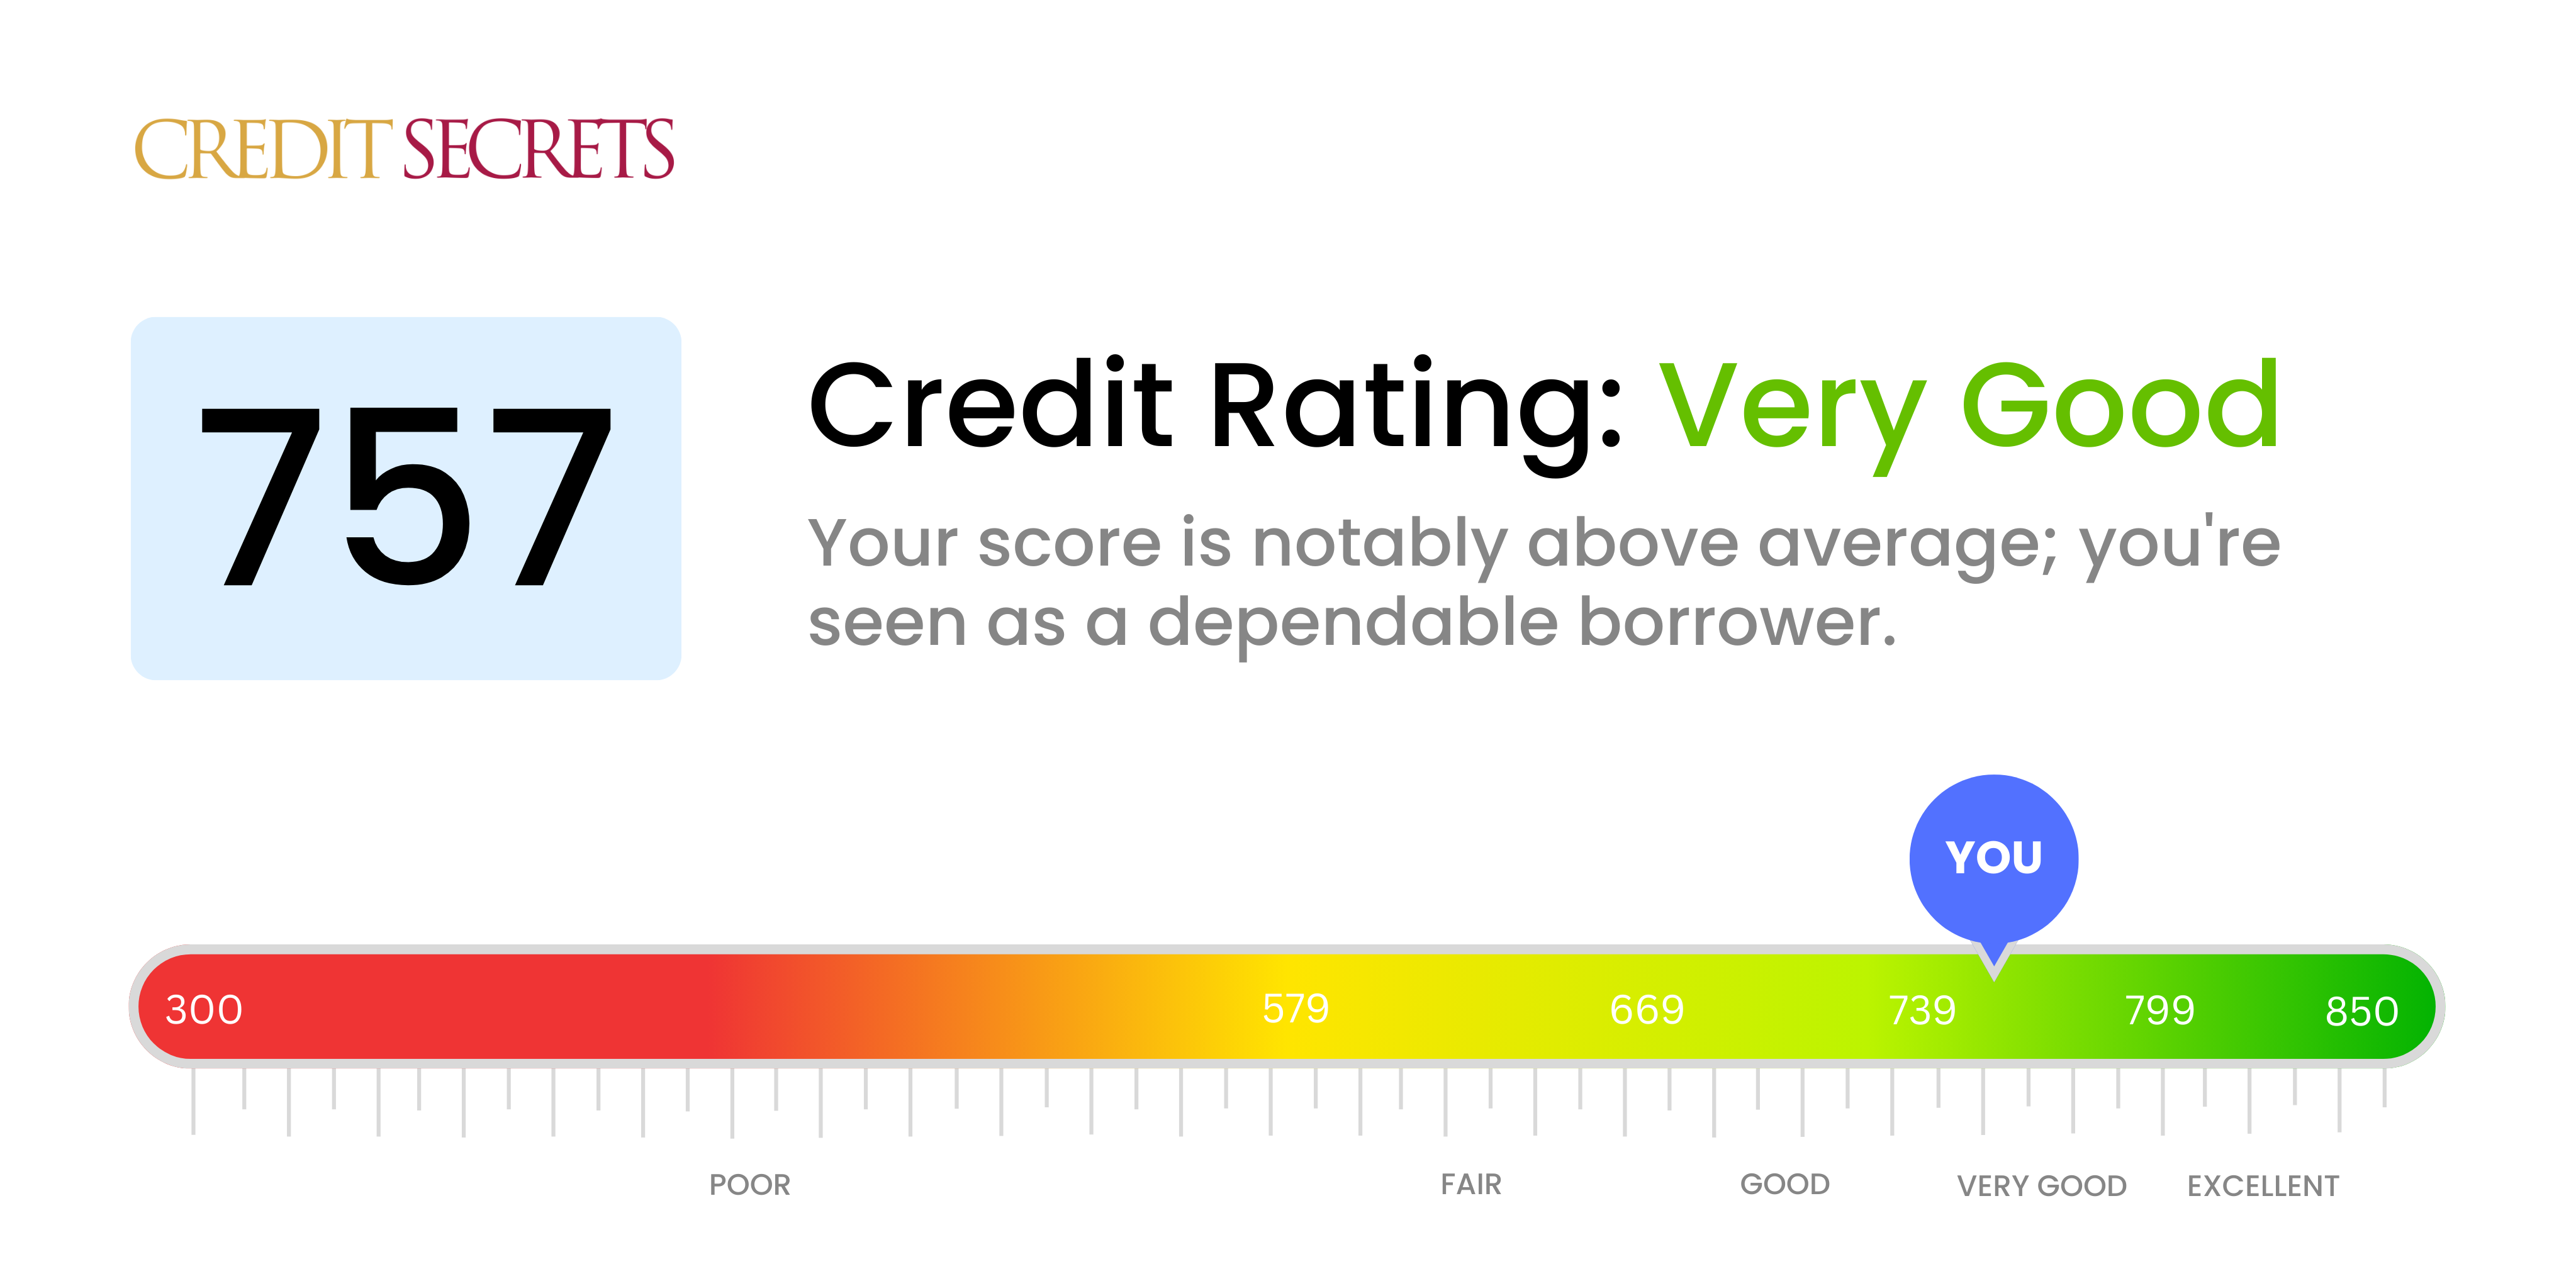 Is 757 a good credit score?